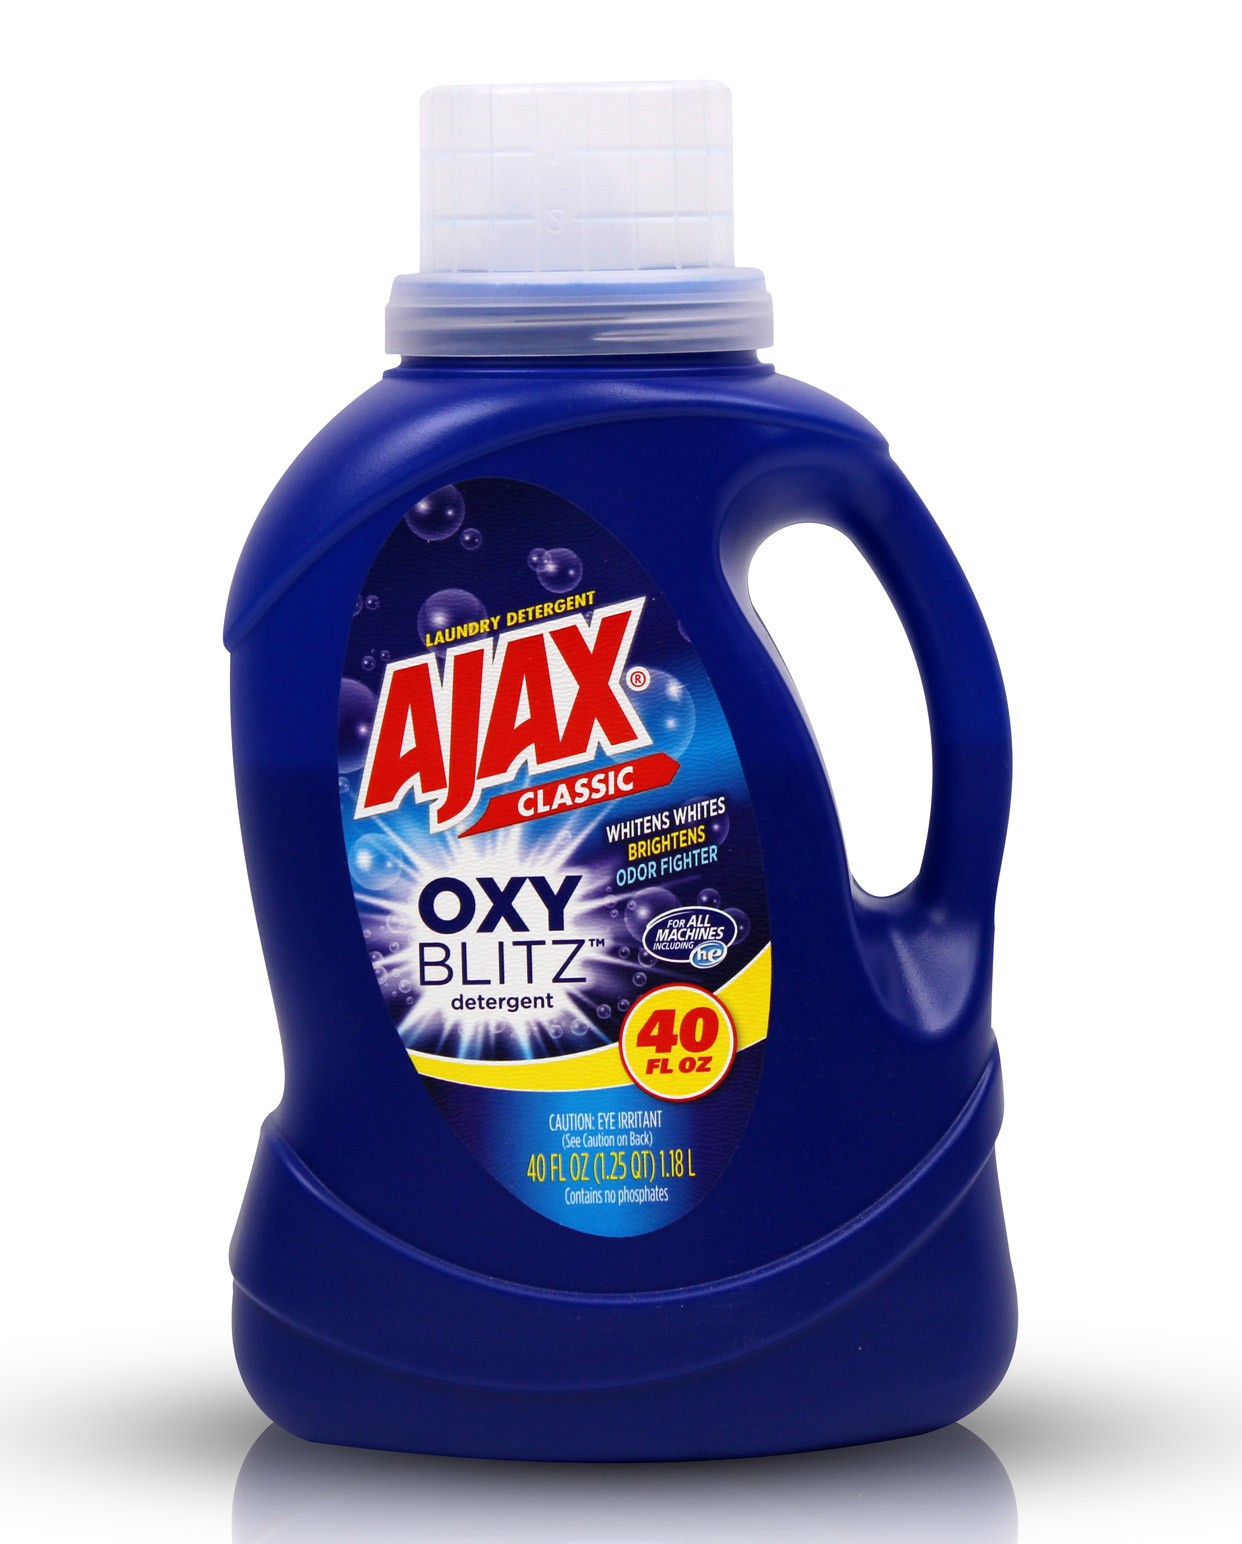 40oz bottle of AJAX Oxygenated Laundry Detergent Oxy Blitz with a clear label.